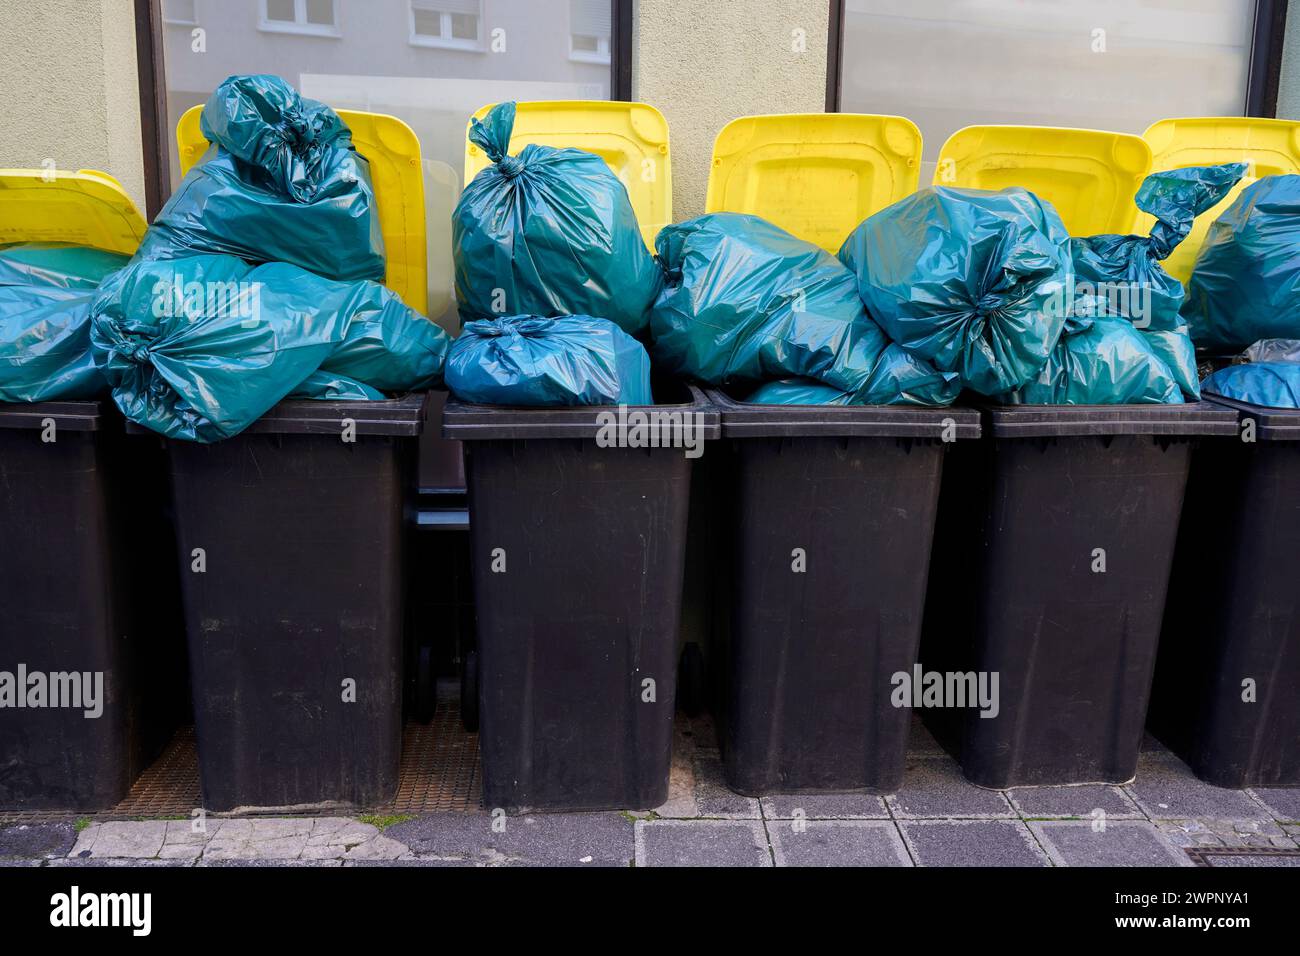 Germany, Bavaria, Nuremberg, garbage cans, next to each other, overfilled, blue garbage bags Stock Photo